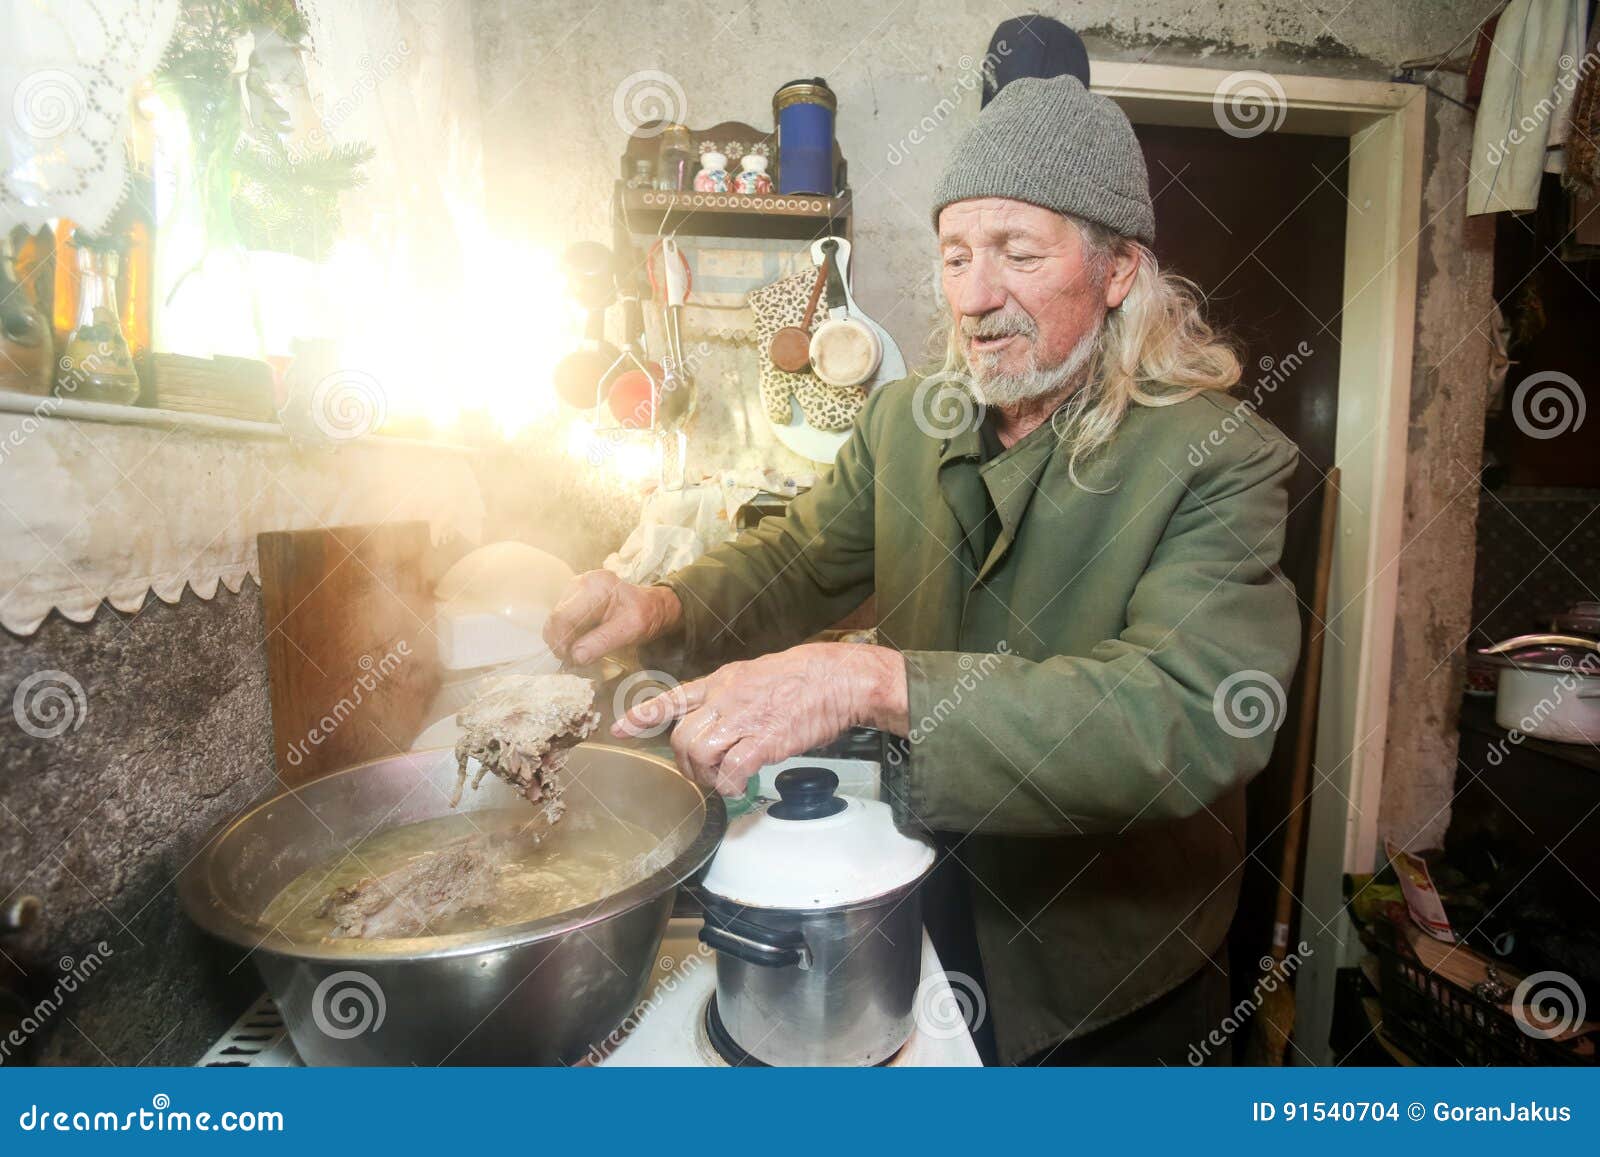 Old man boiling pork stock photo. Image of male, inside - 91540704